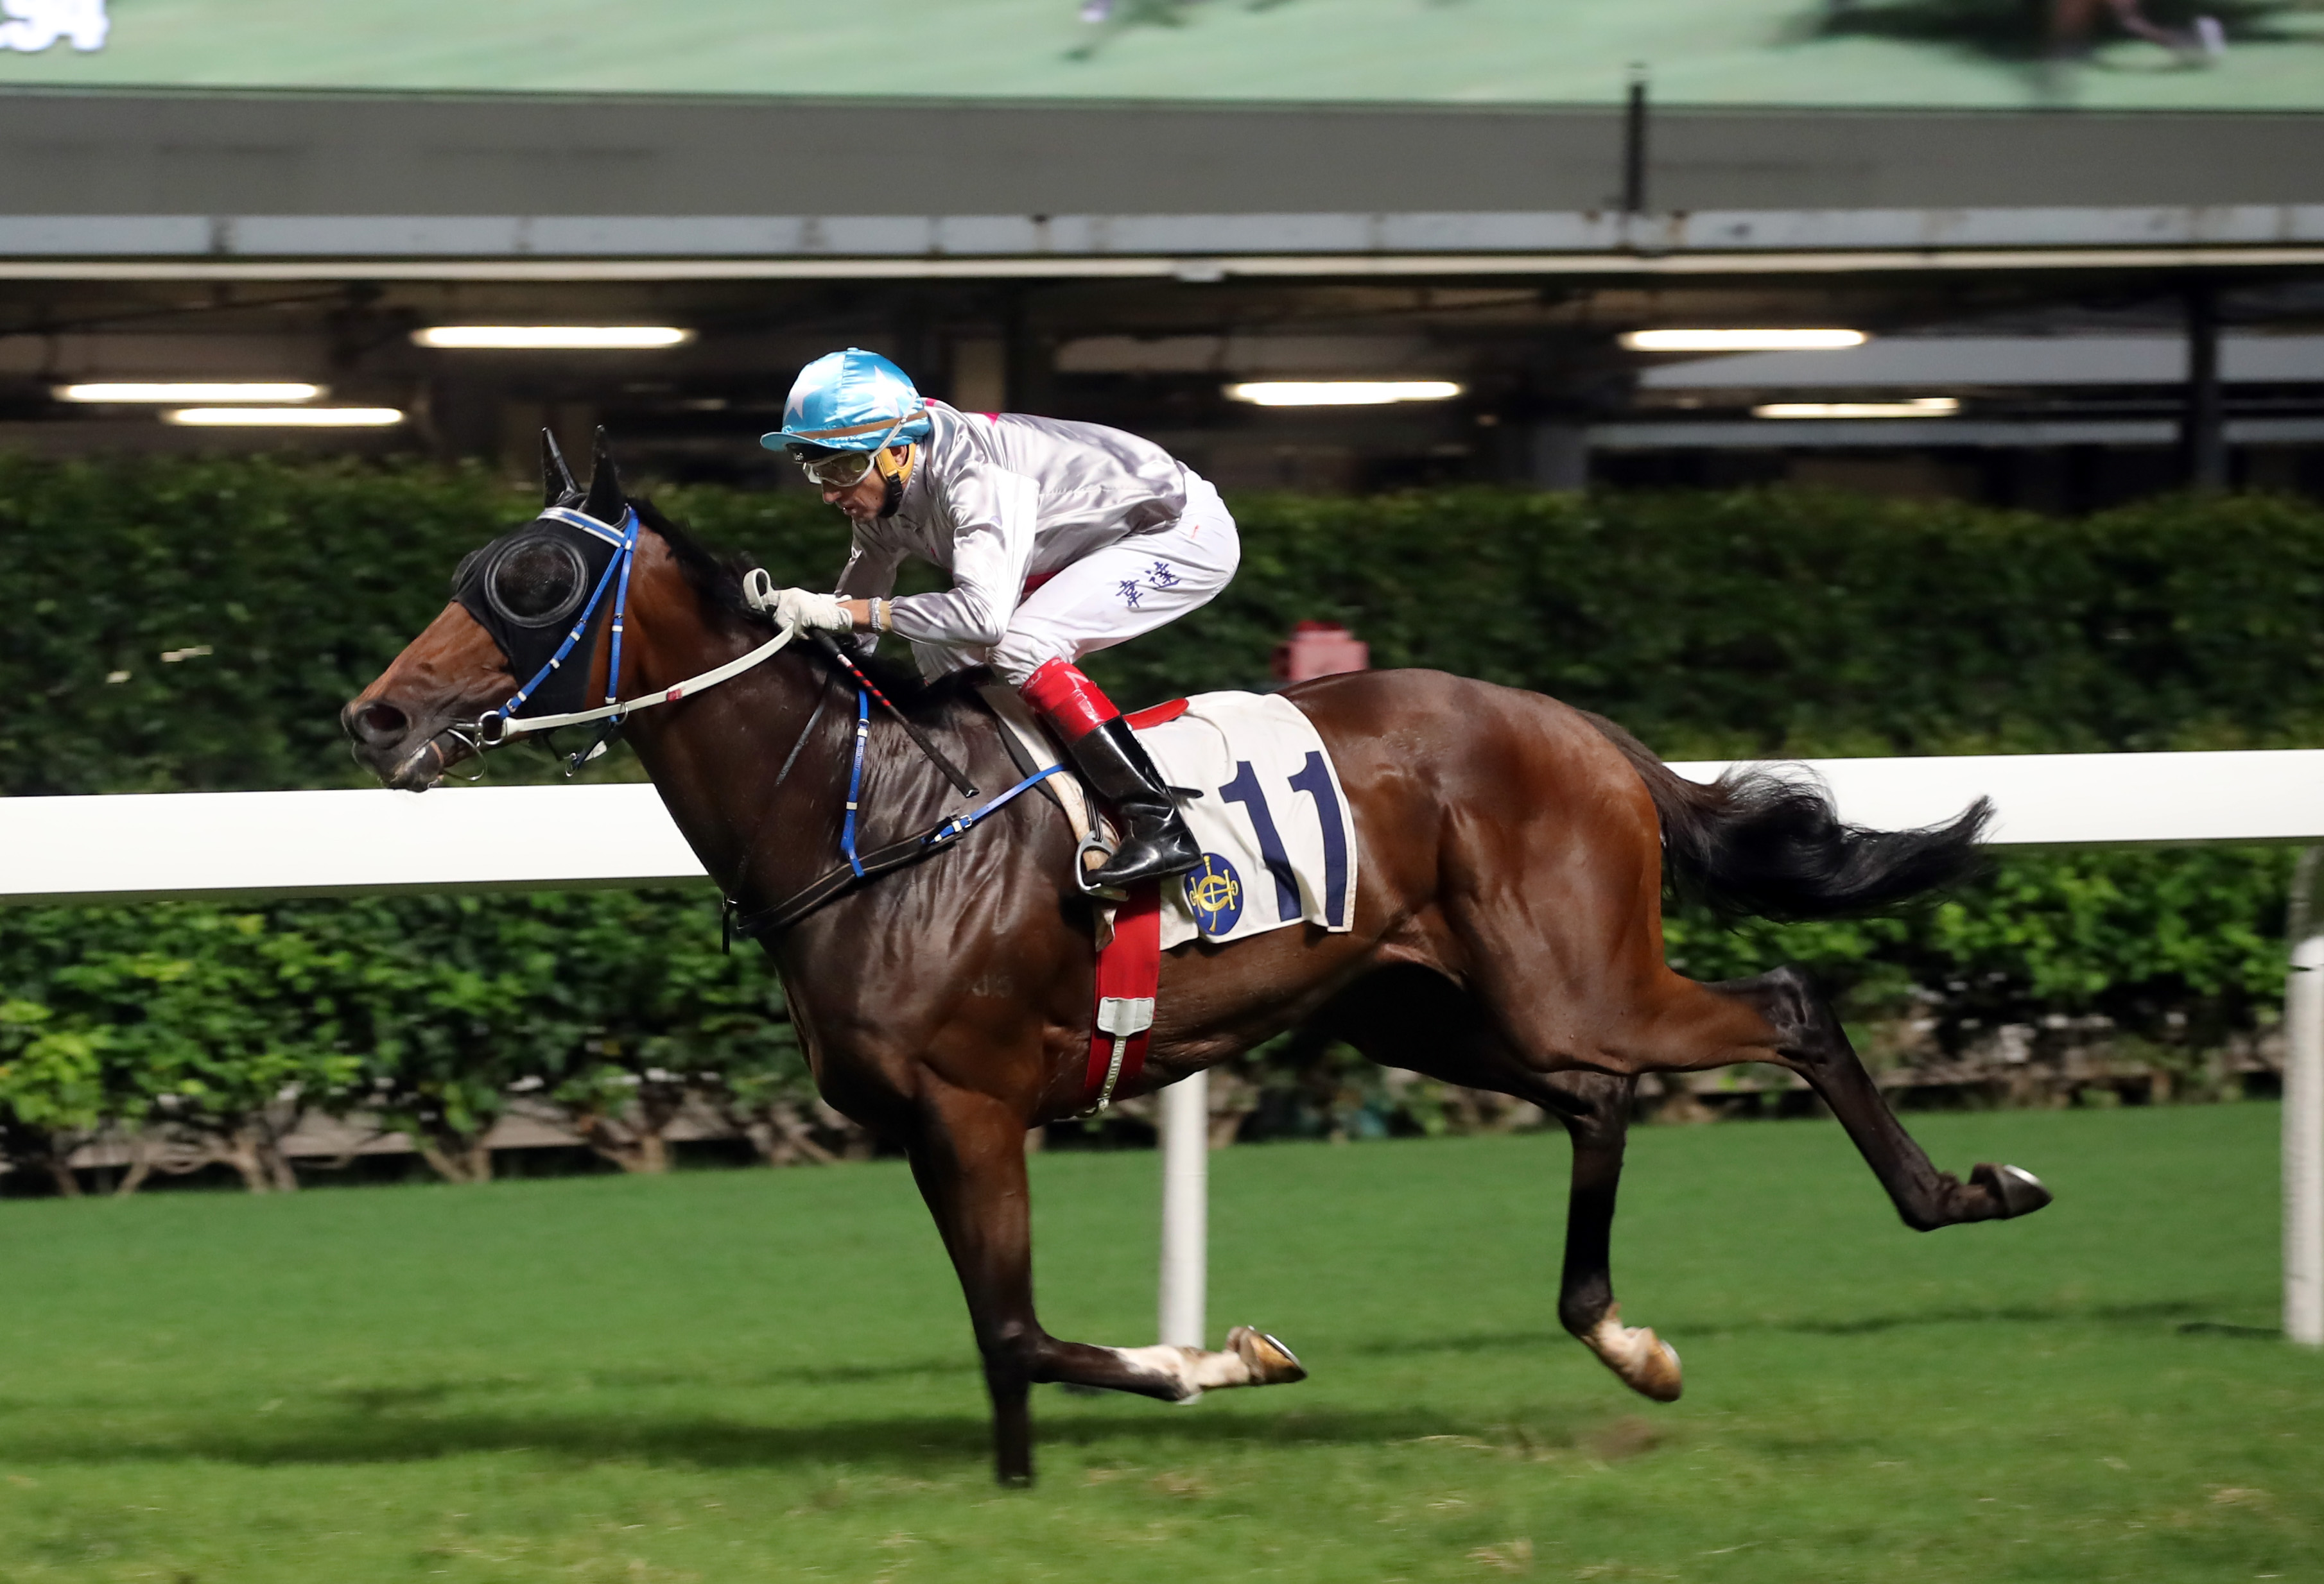 Limitless will attempt to back-up his last start win at Happy Valley